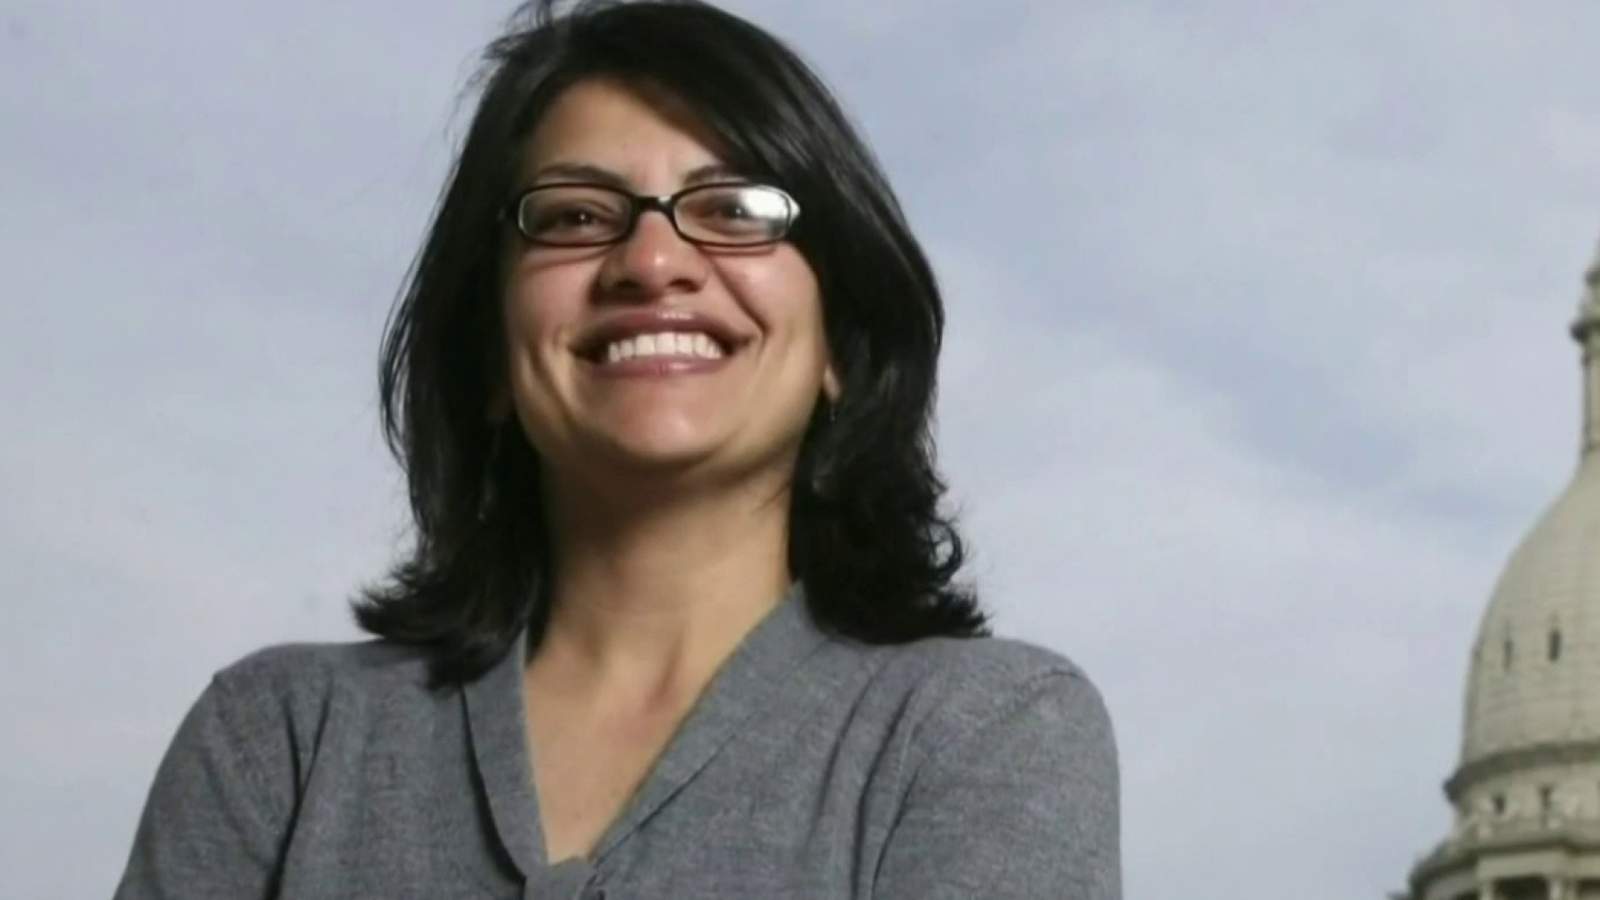 Rep. Rashida Tlaib’s tweet about police draws pushback from law enforcement